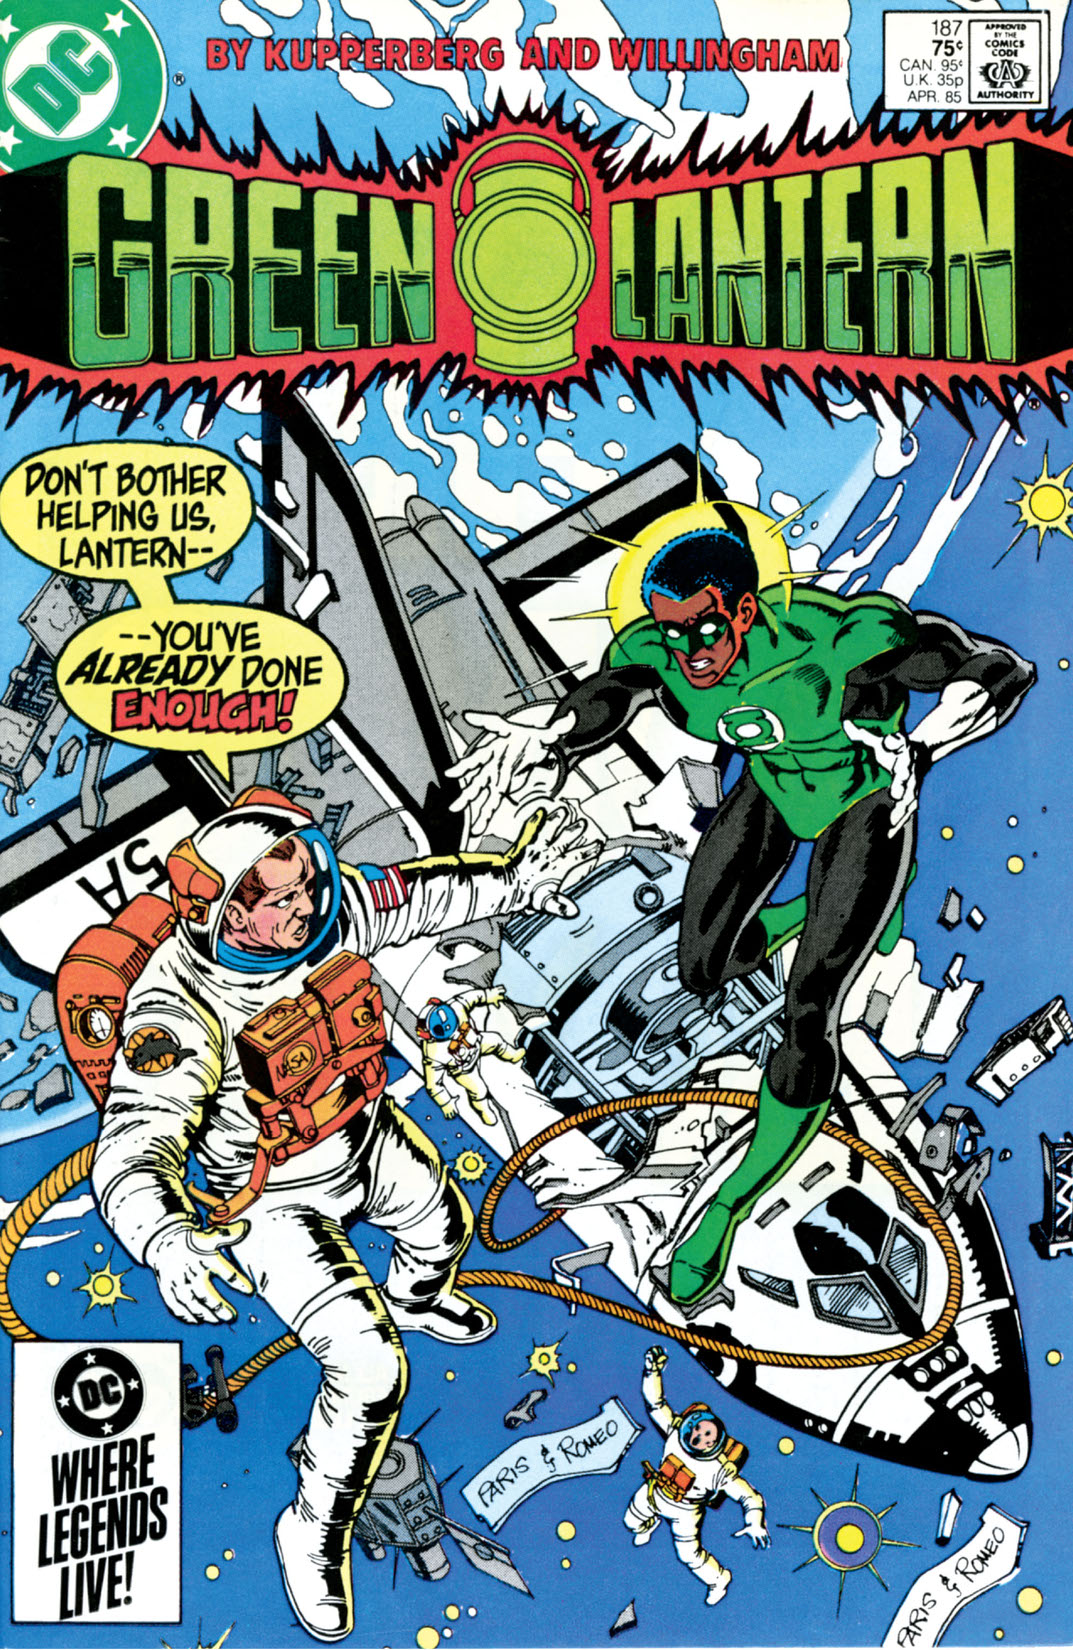 Green Lantern (1960-) #187 preview images